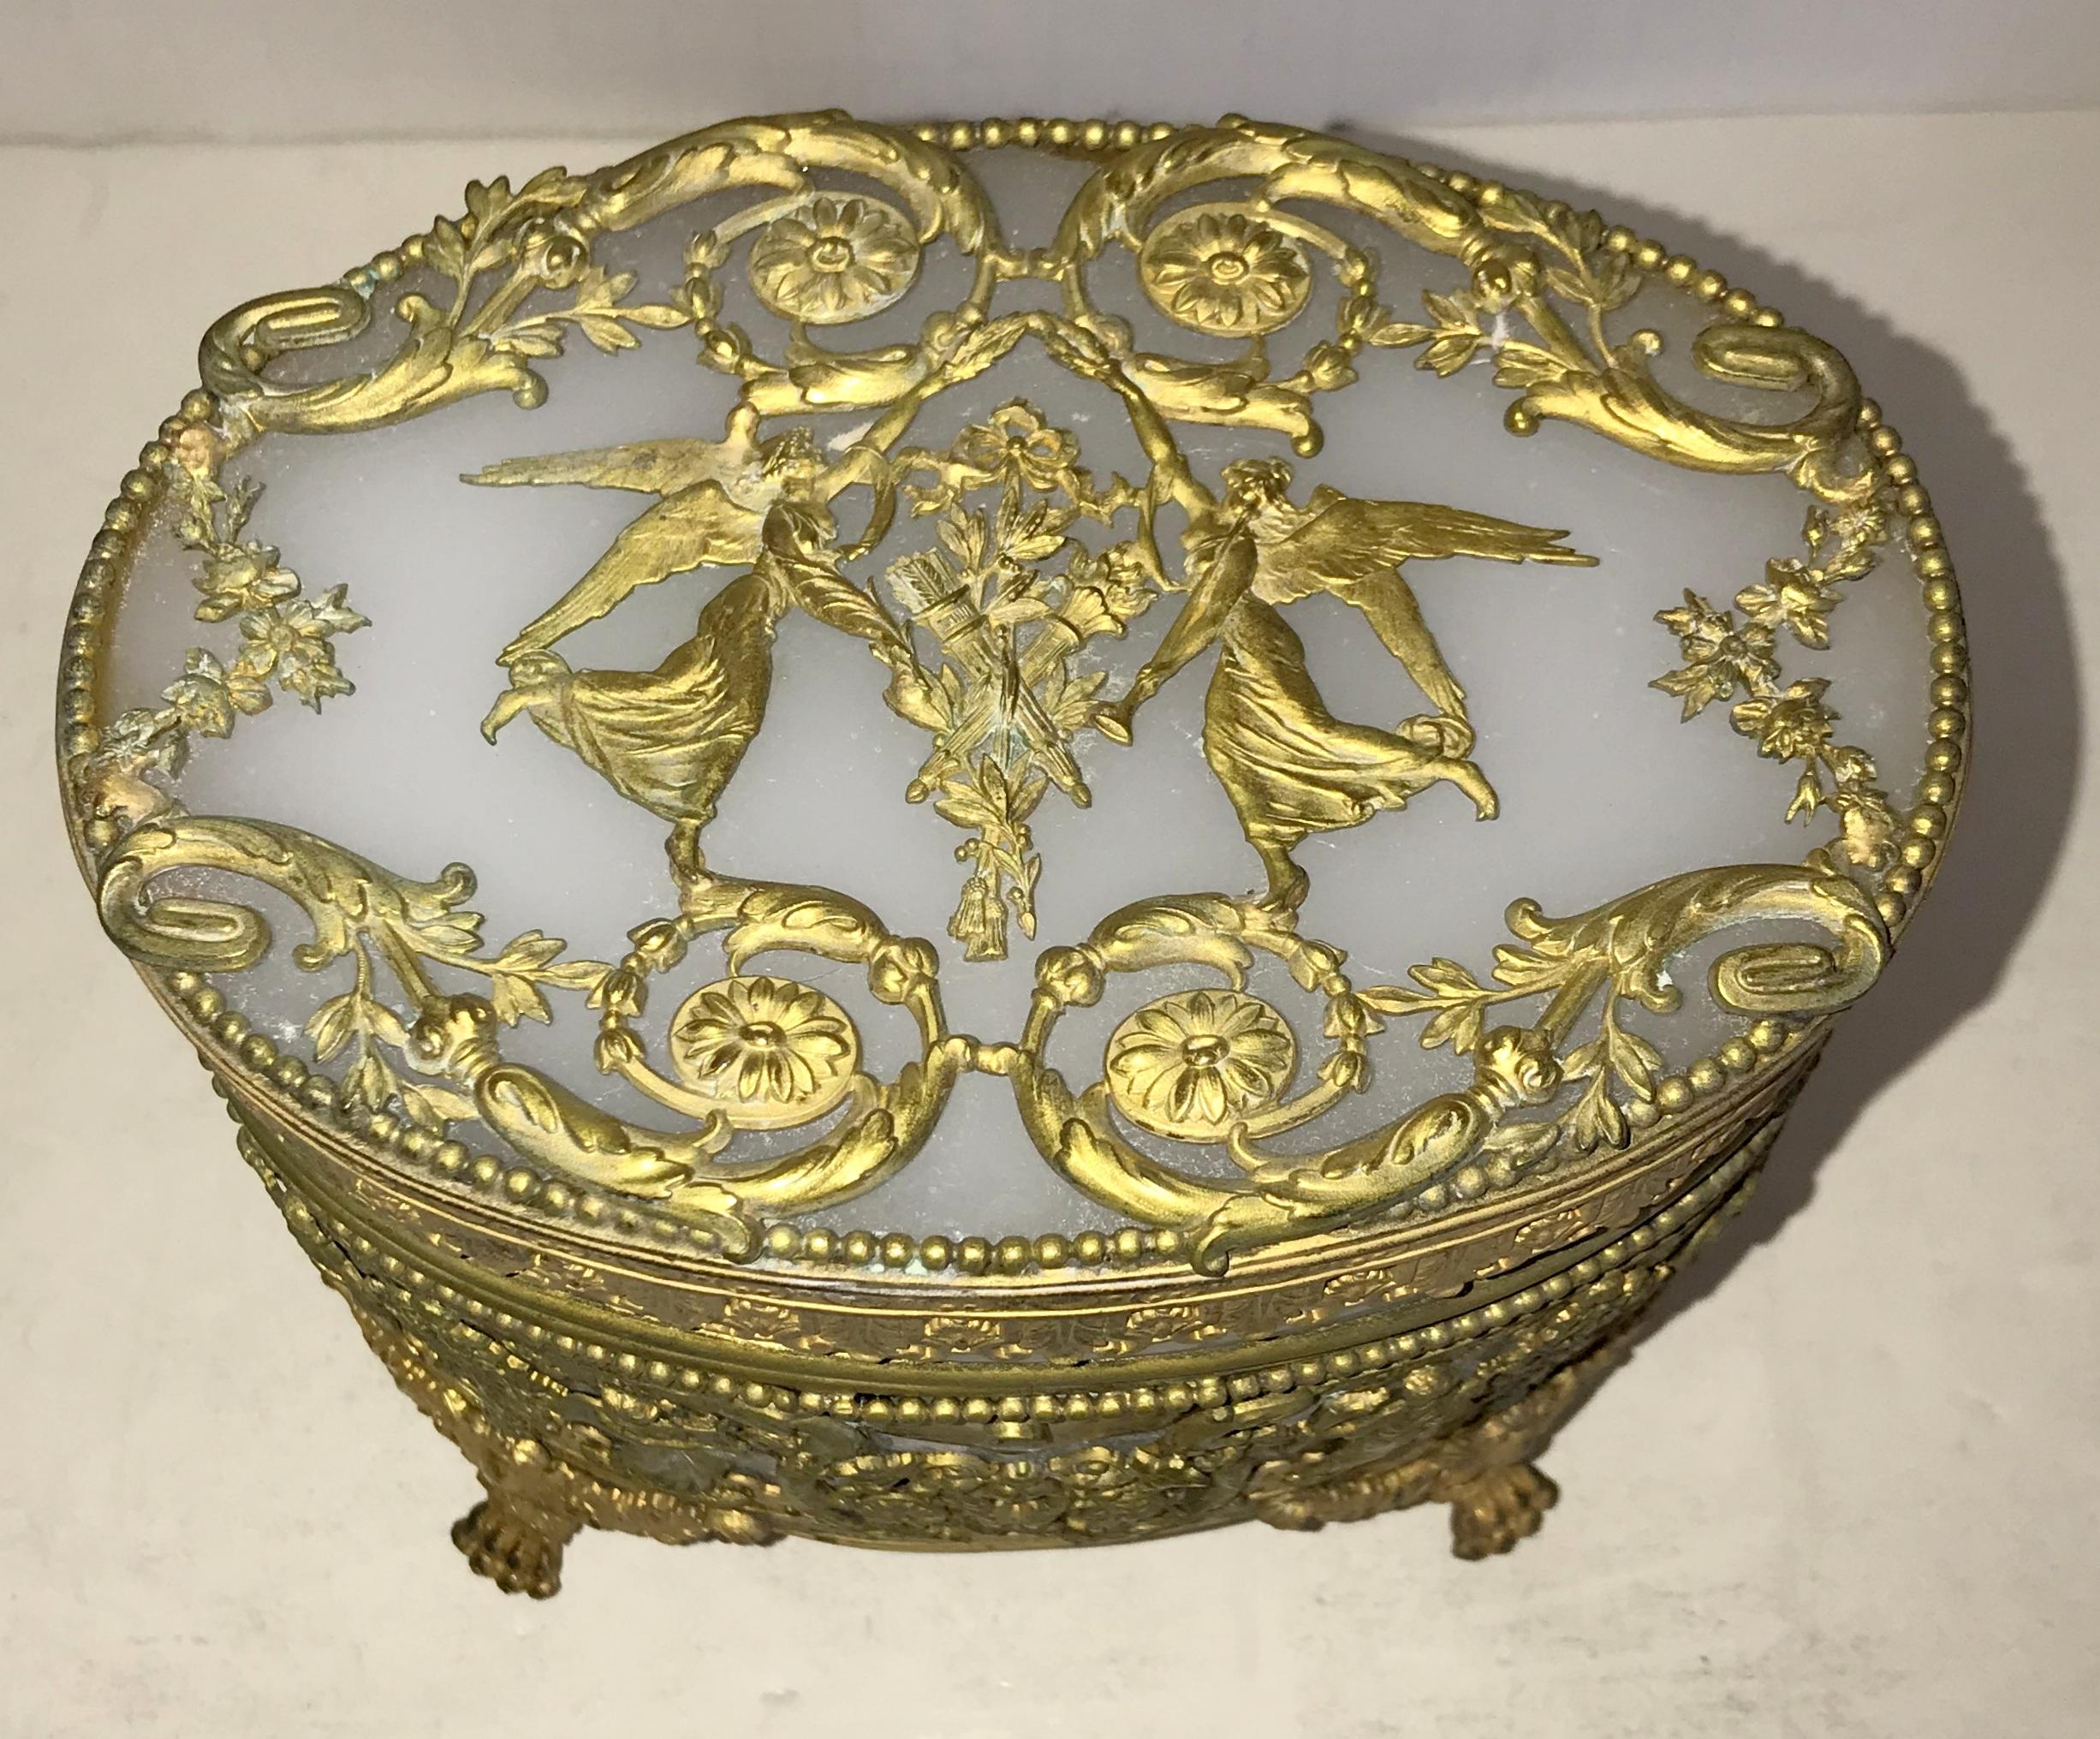 A very fine and wonderful French empire gilt doré bronze and white opaline neoclassical oval ormolu casket with raised paw feet Regency box.